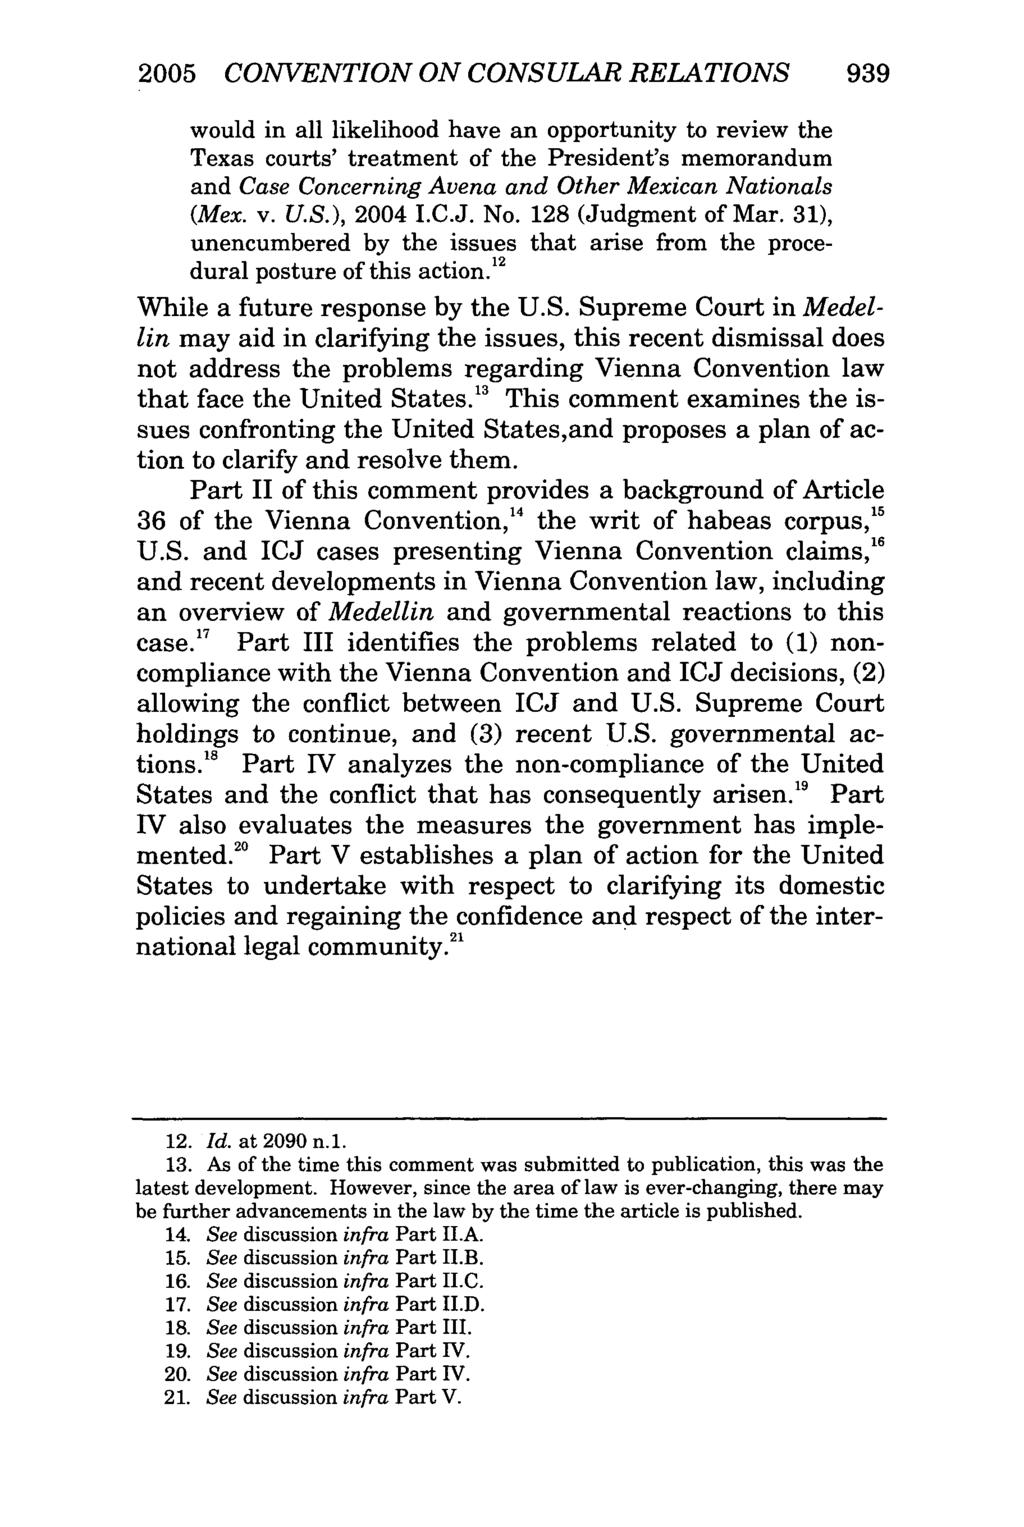 2005 CONVENTION ON CONSULAR RELATIONS 939 would in all likelihood have an opportunity to review the Texas courts' treatment of the President's memorandum and Case Concerning Avena and Other Mexican